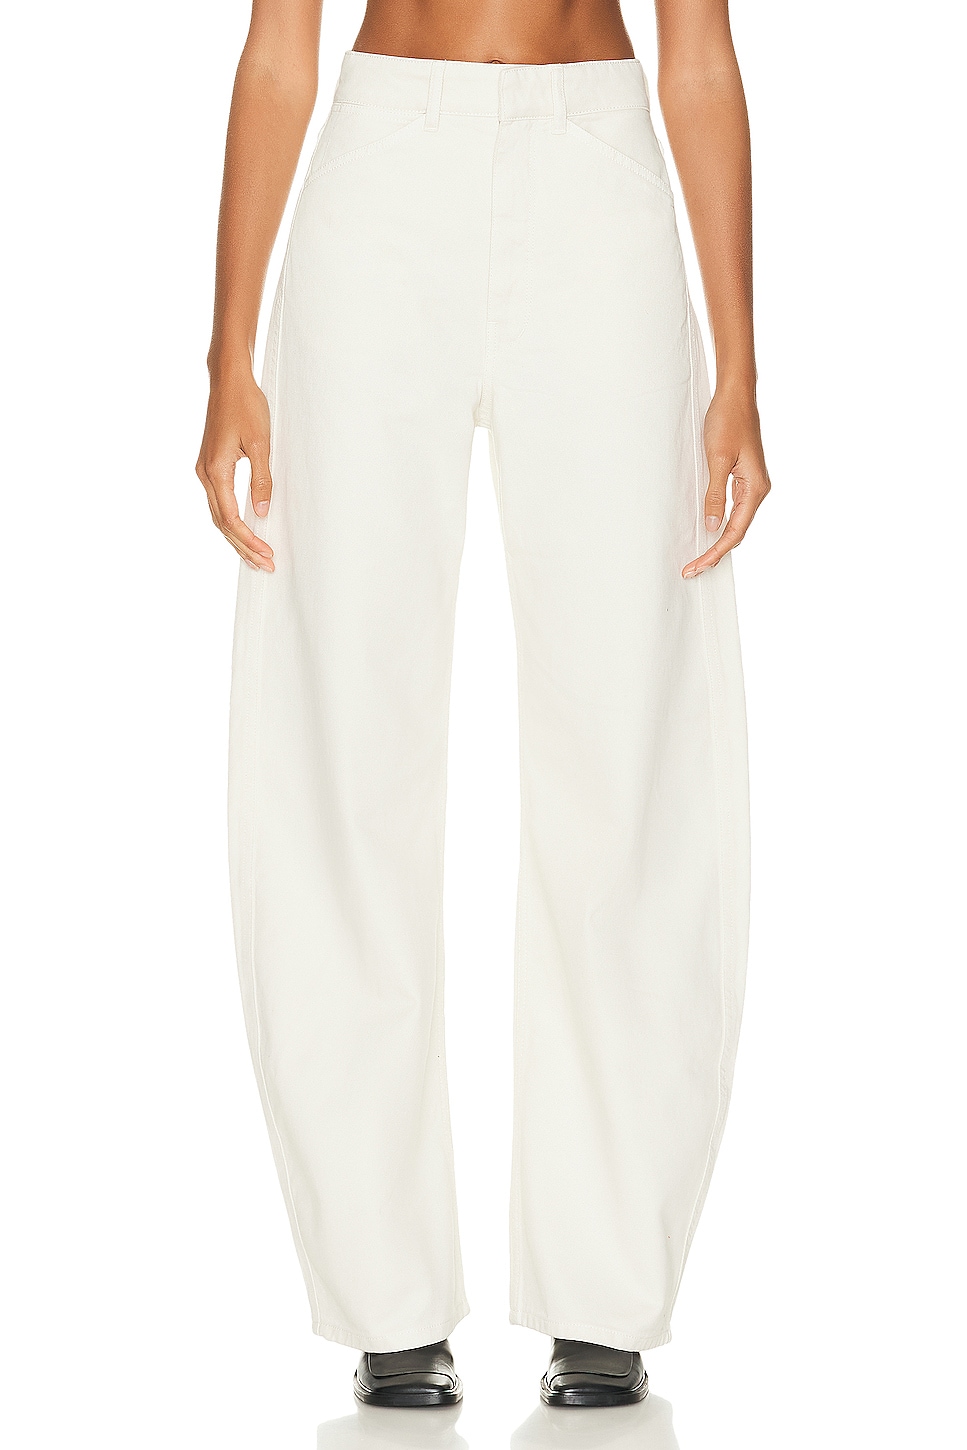 Image 1 of Lemaire High Waisted Curved Pant in Clay White